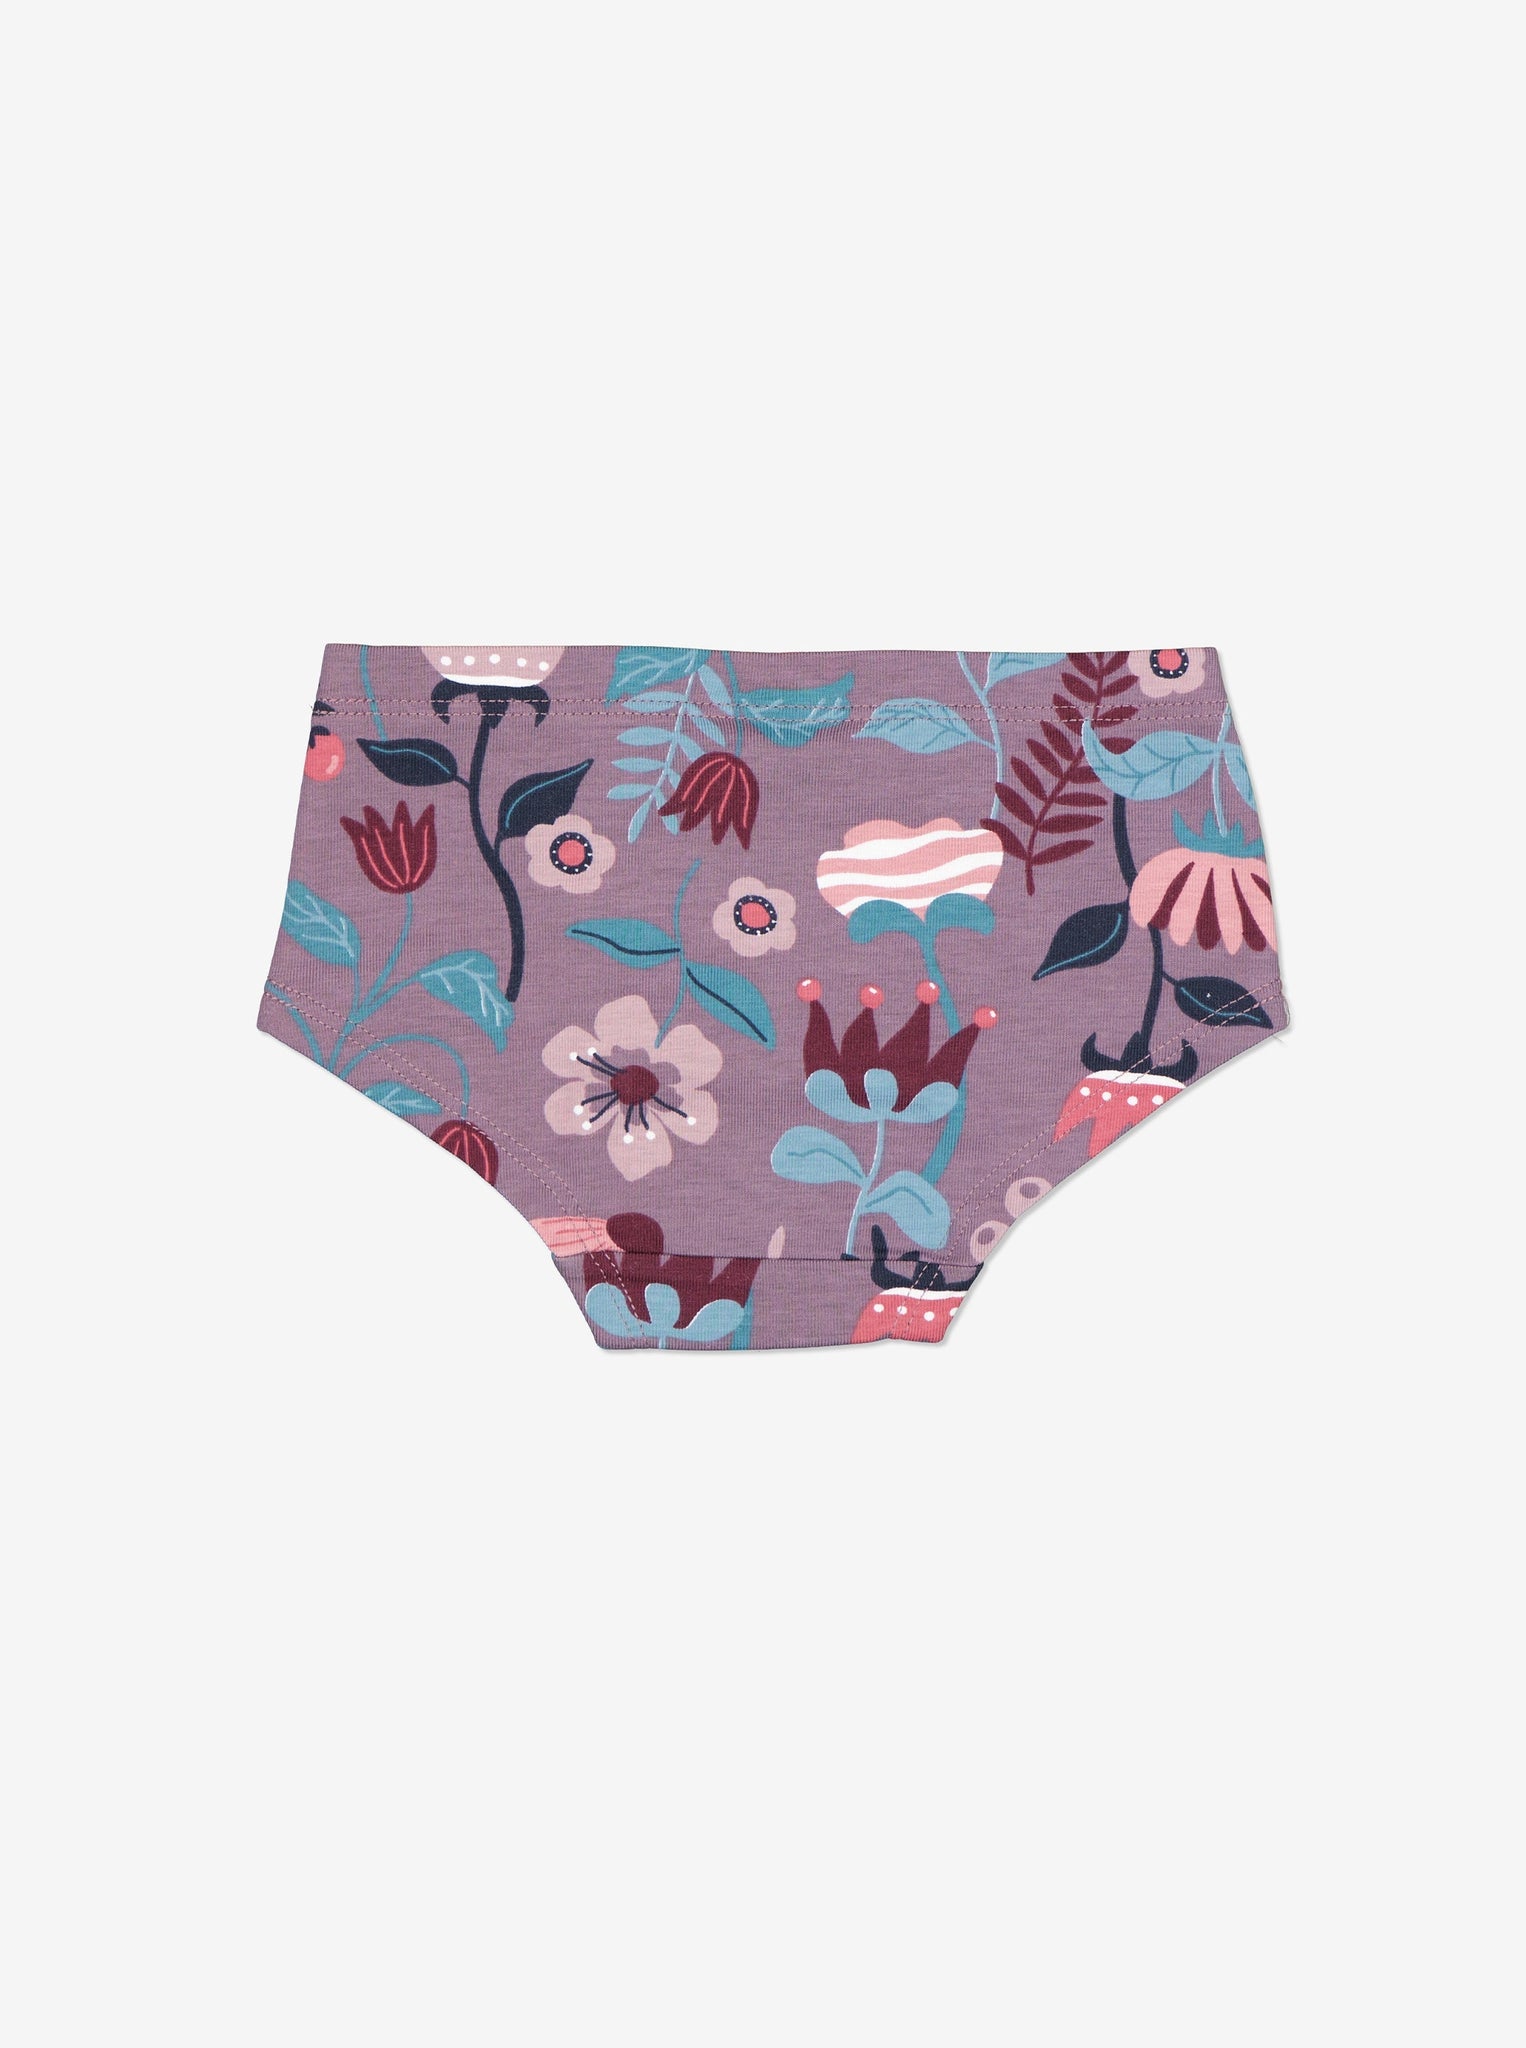 Organic Cotton Purple Girls Briefs from the Polarn O. Pyret kidswear collection. The best ethical kids clothes